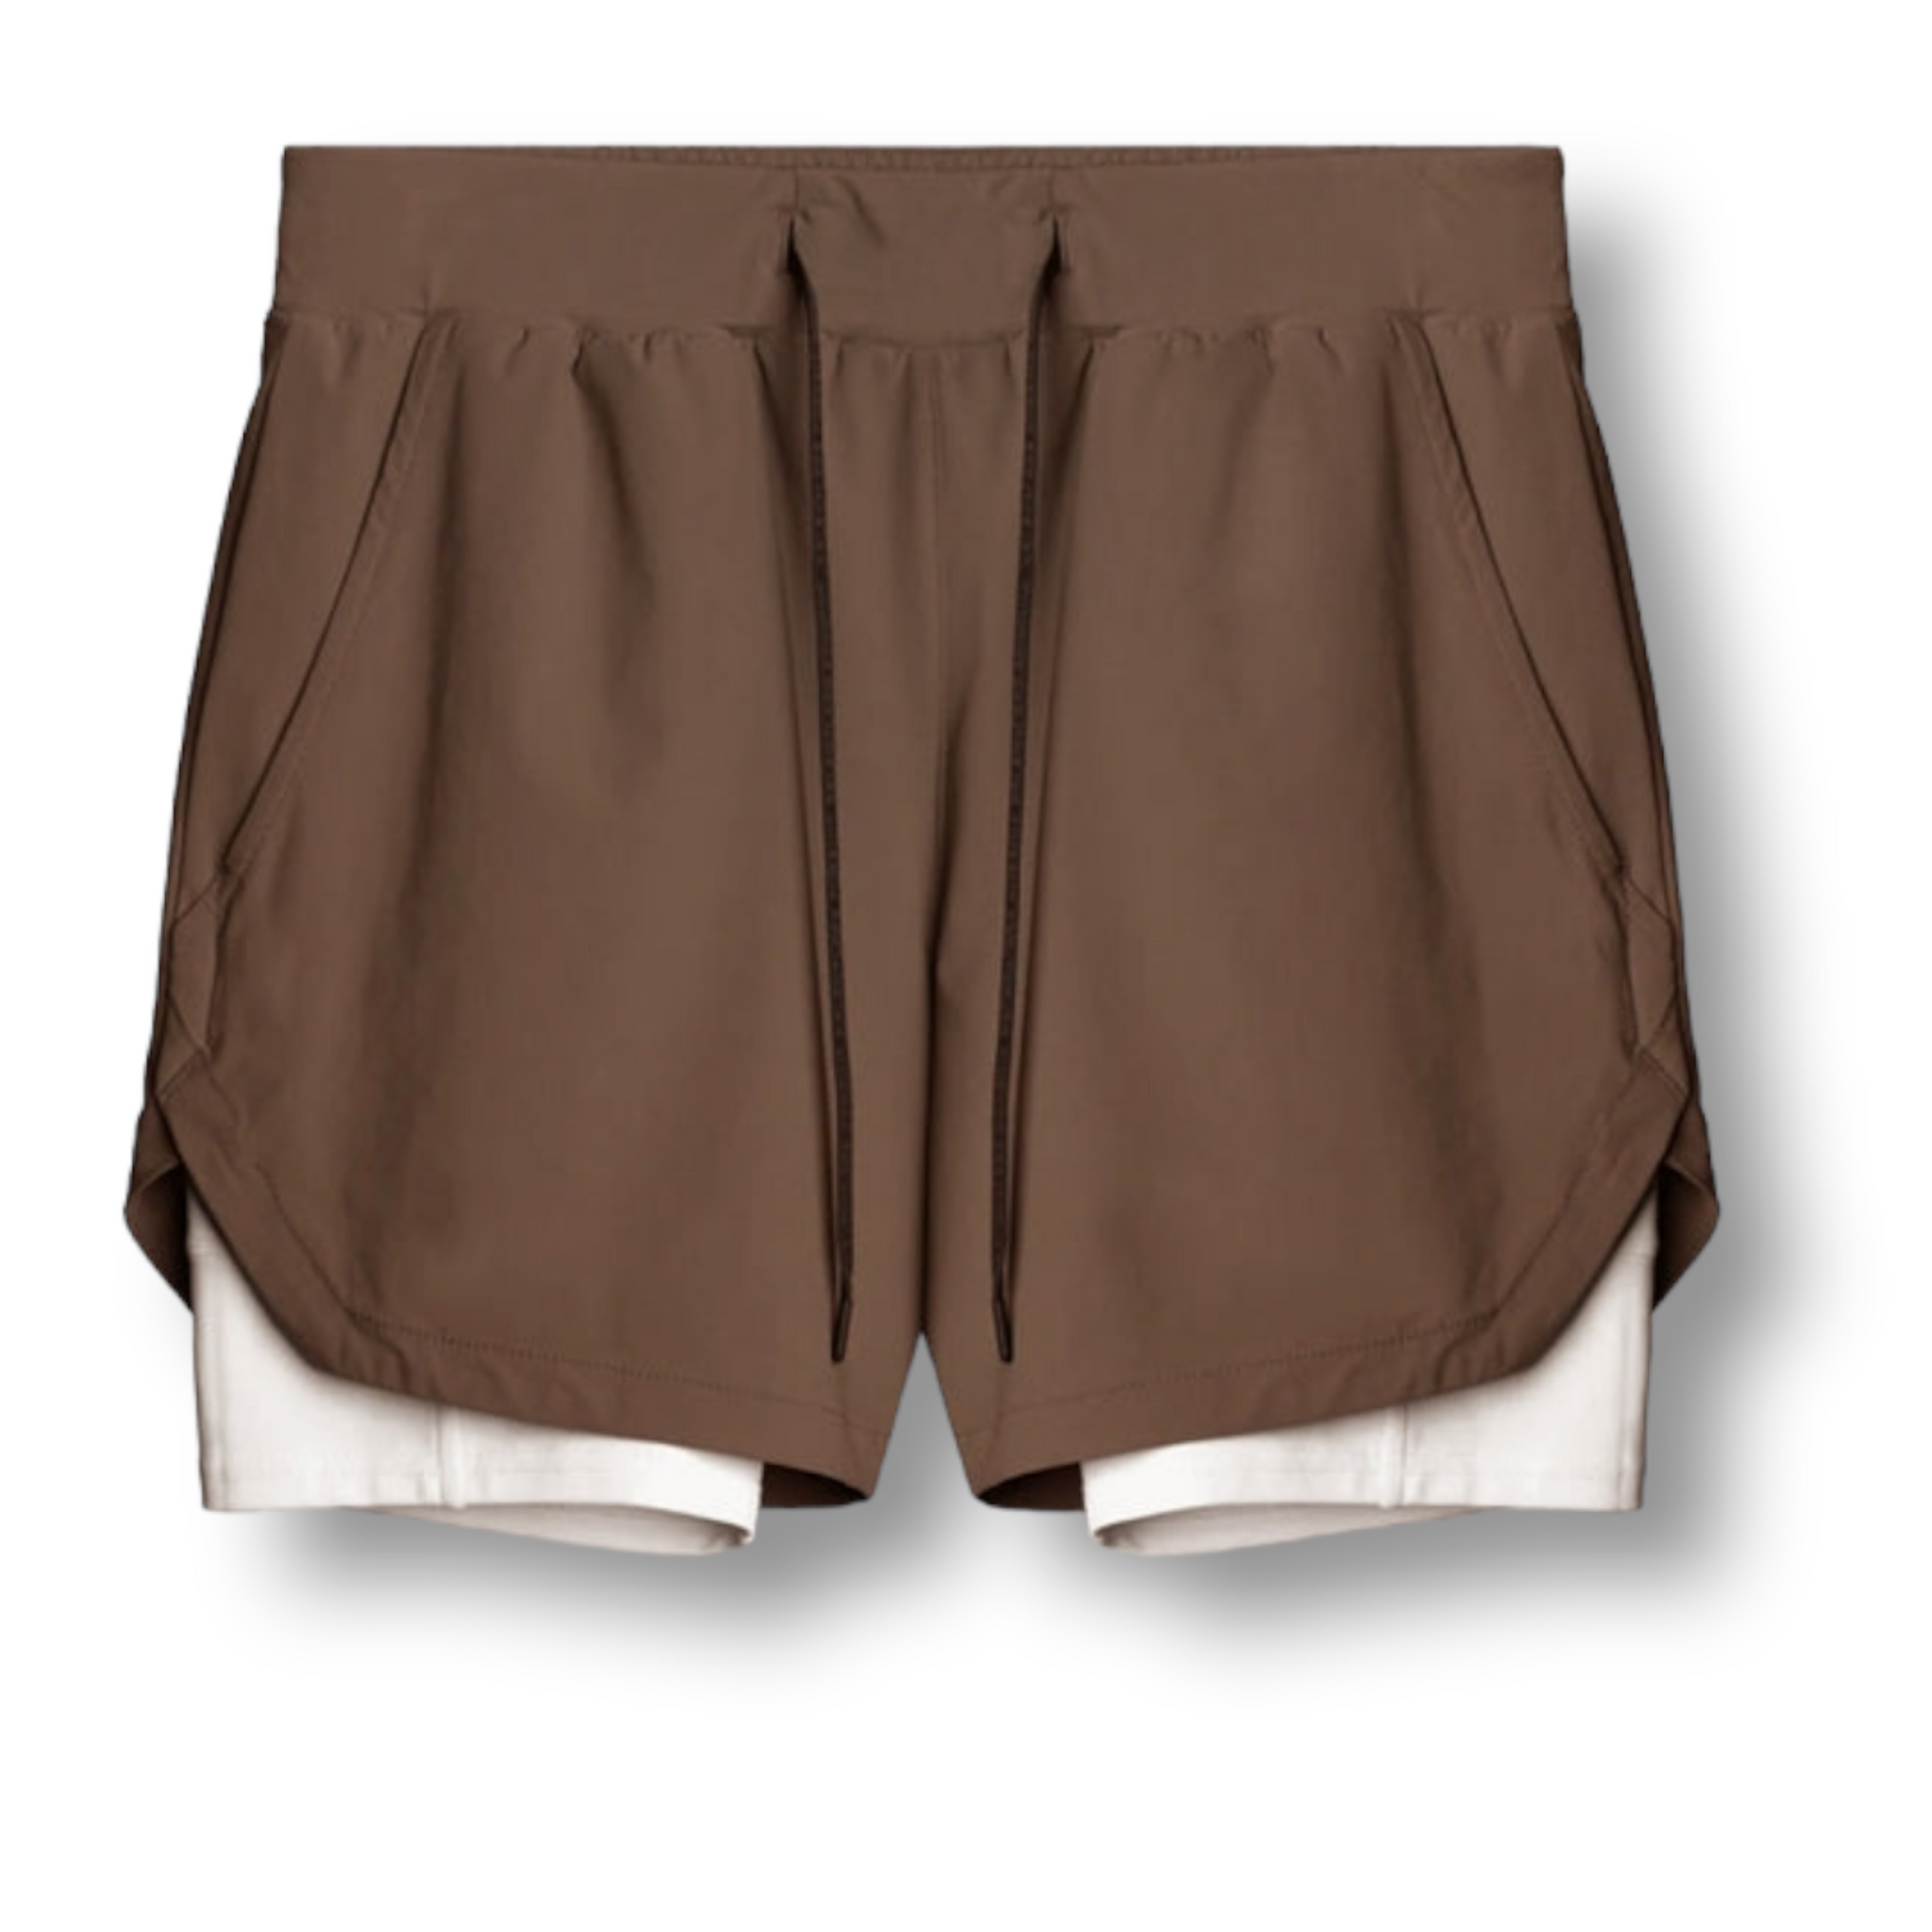 a pair of brown elijah gym shorts with liner underneath on a white background